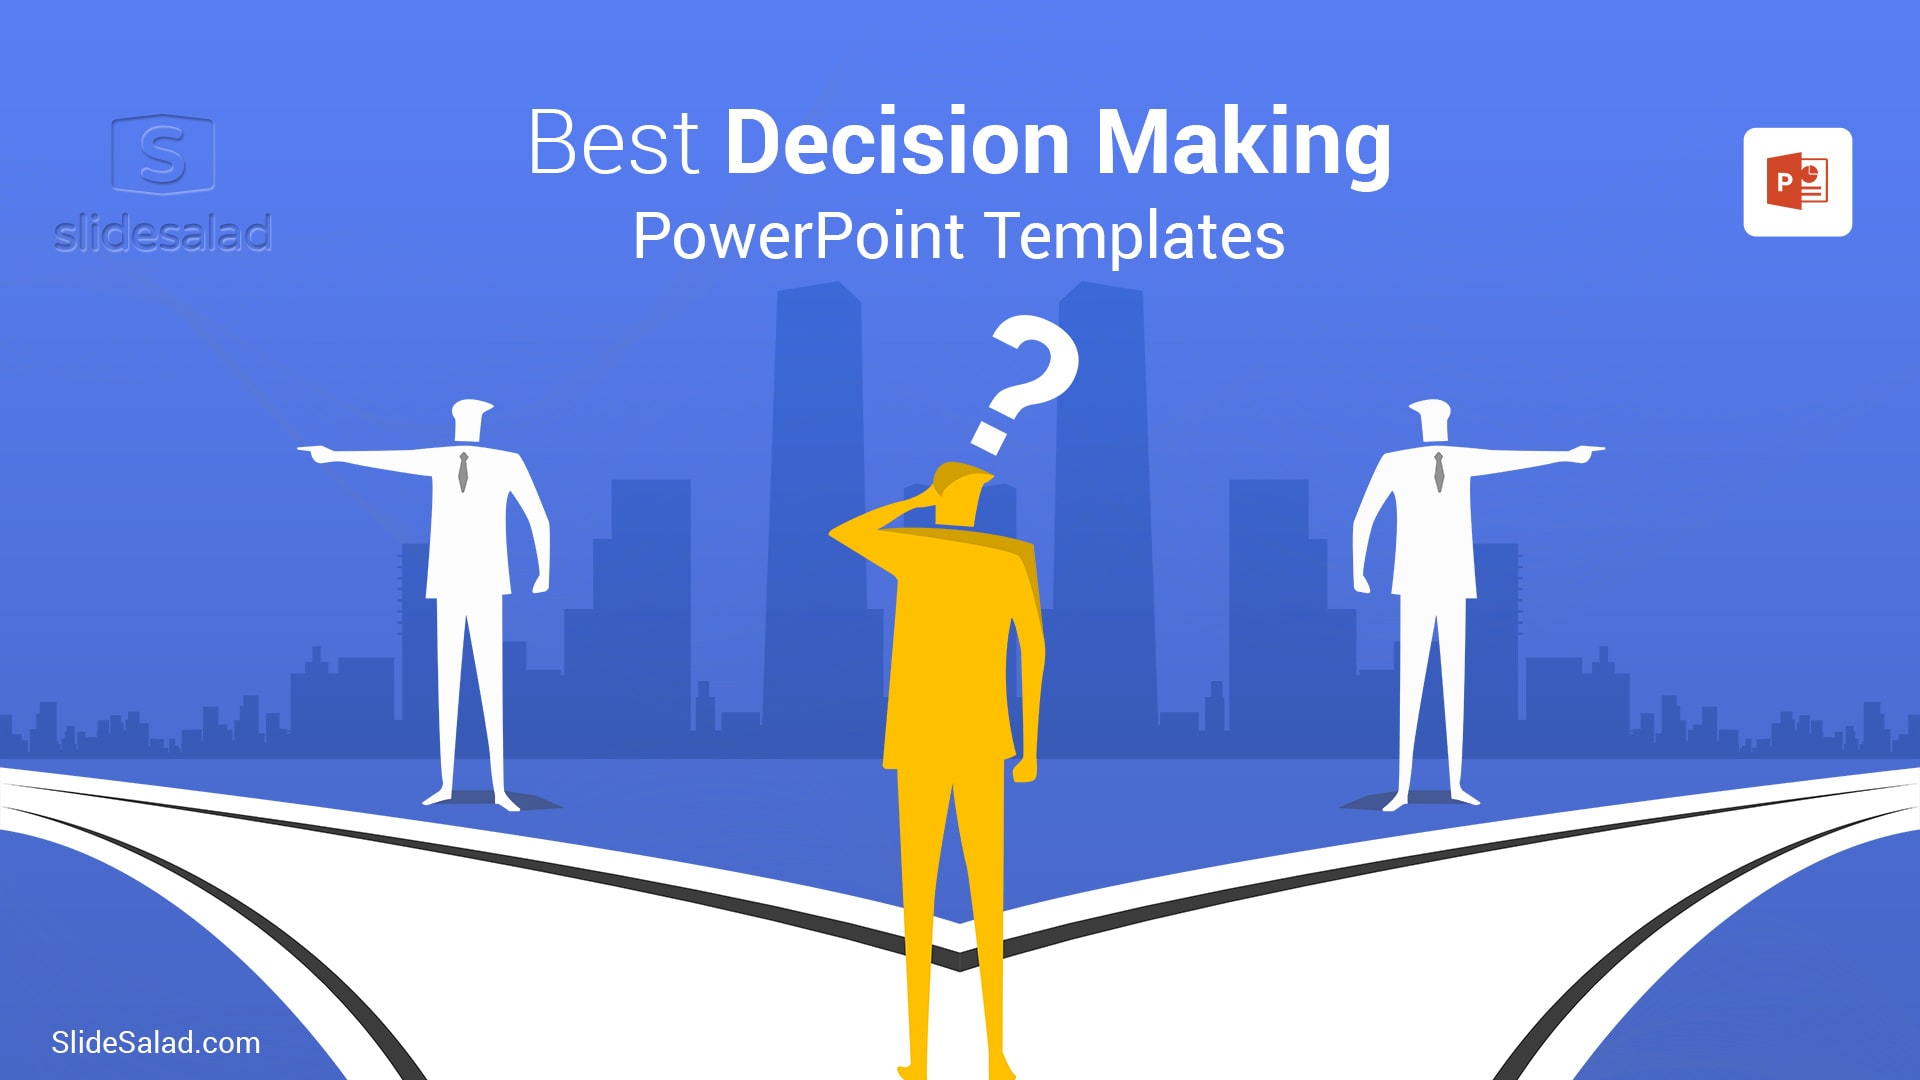 Best Decision Making PowerPoint Templates